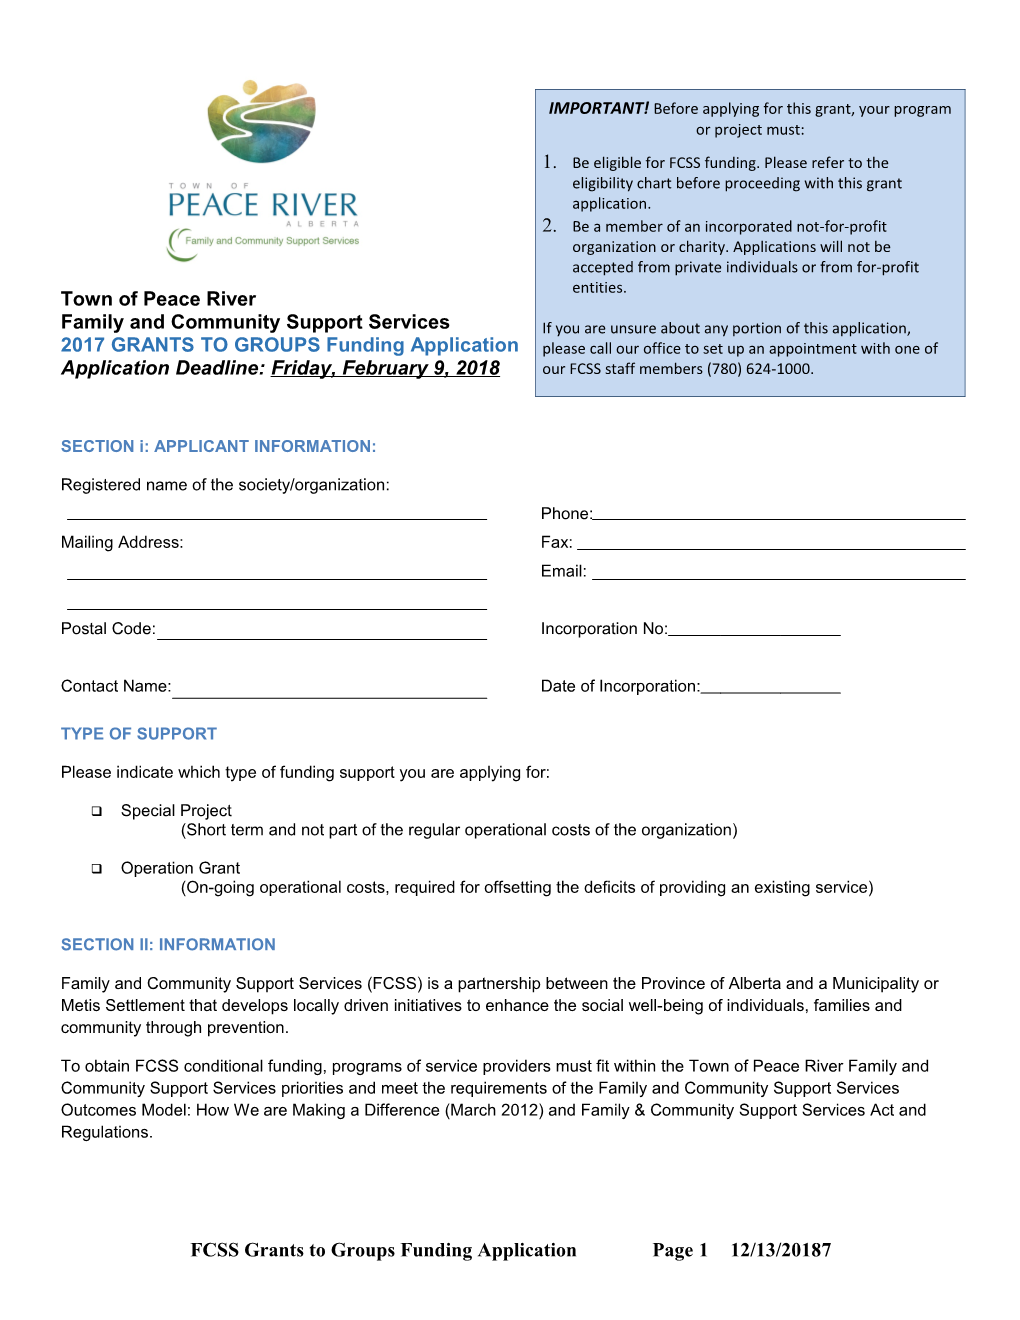 Town of Peace River Family and Community Support Services